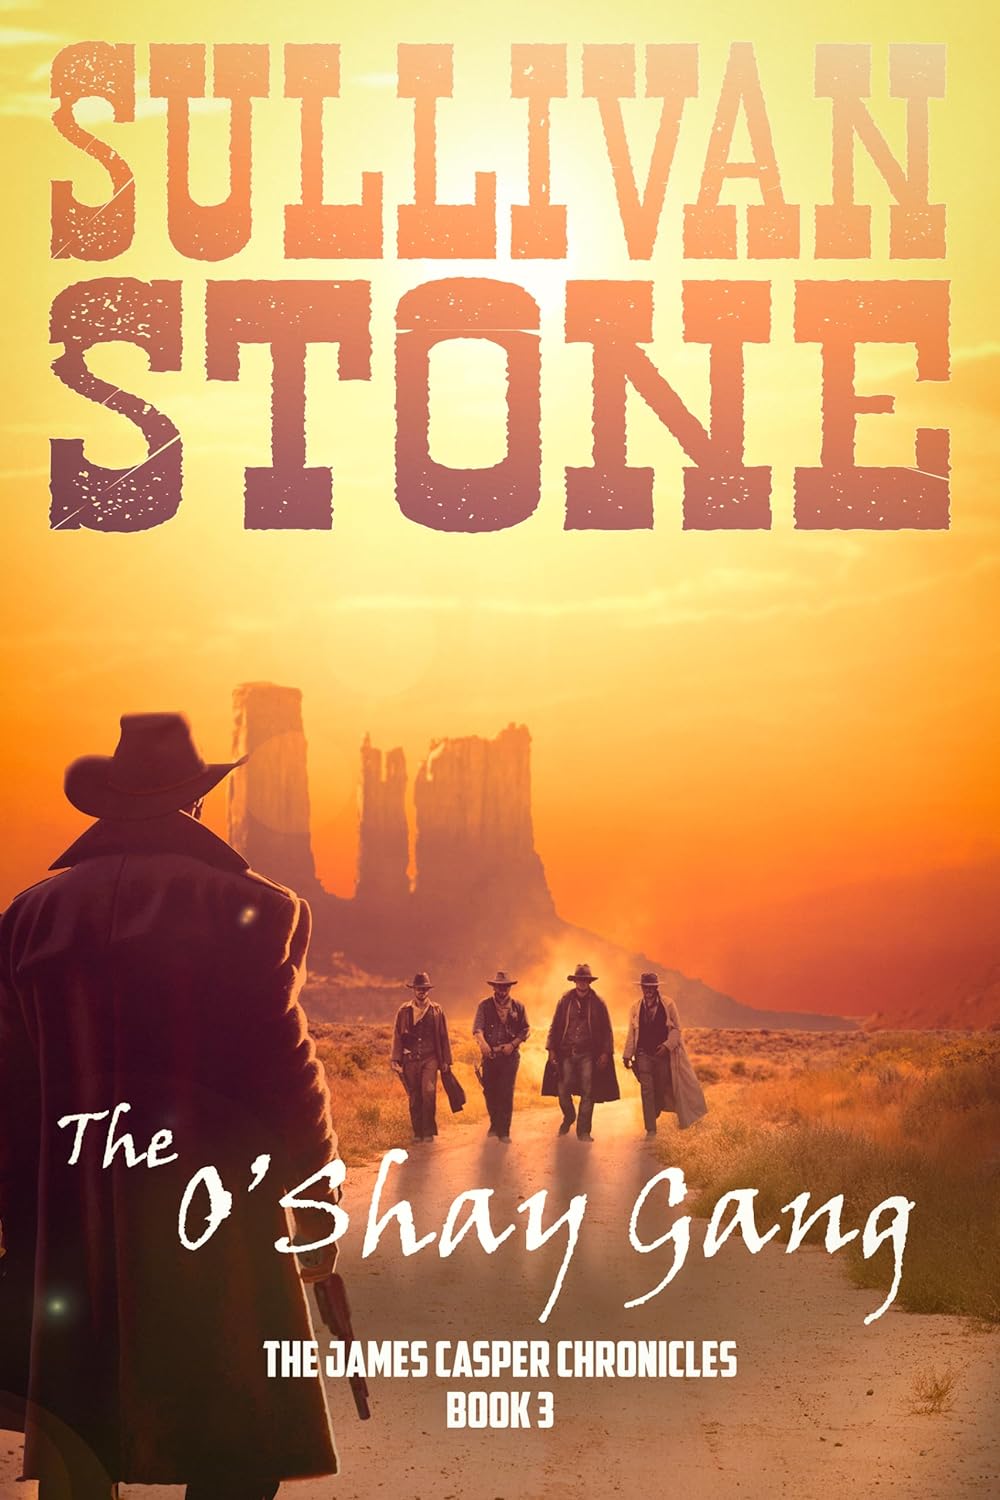 The O'Shay Gang by Sullivan Stone - The Chronicles of James Casper Book 3